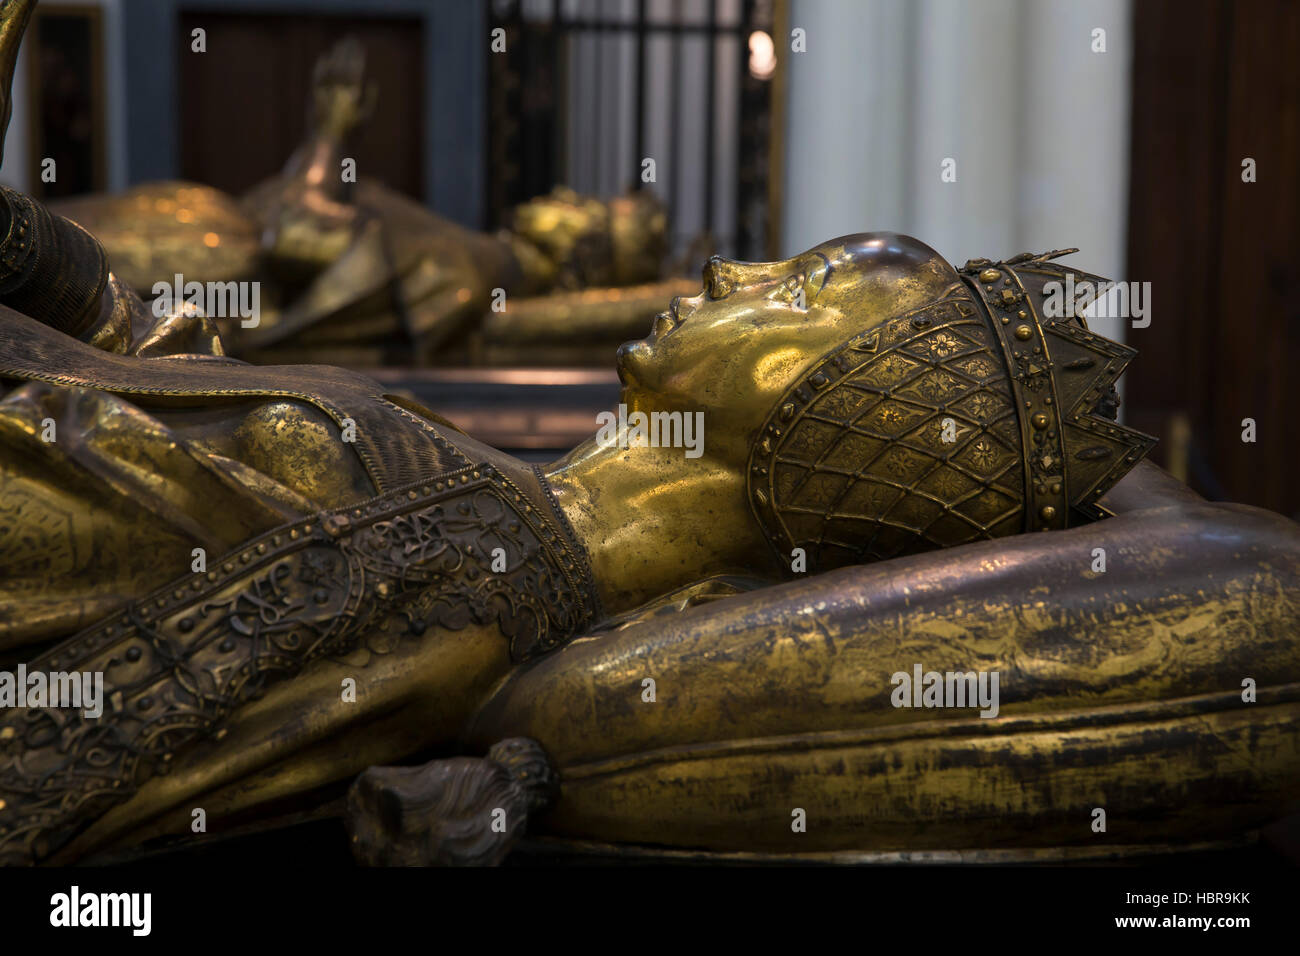 Brass ceremonial tombs of Charles the Bold, Mary of Burgundy,  Church of Our Lady, Bruges, Belgium, Europe Stock Photo